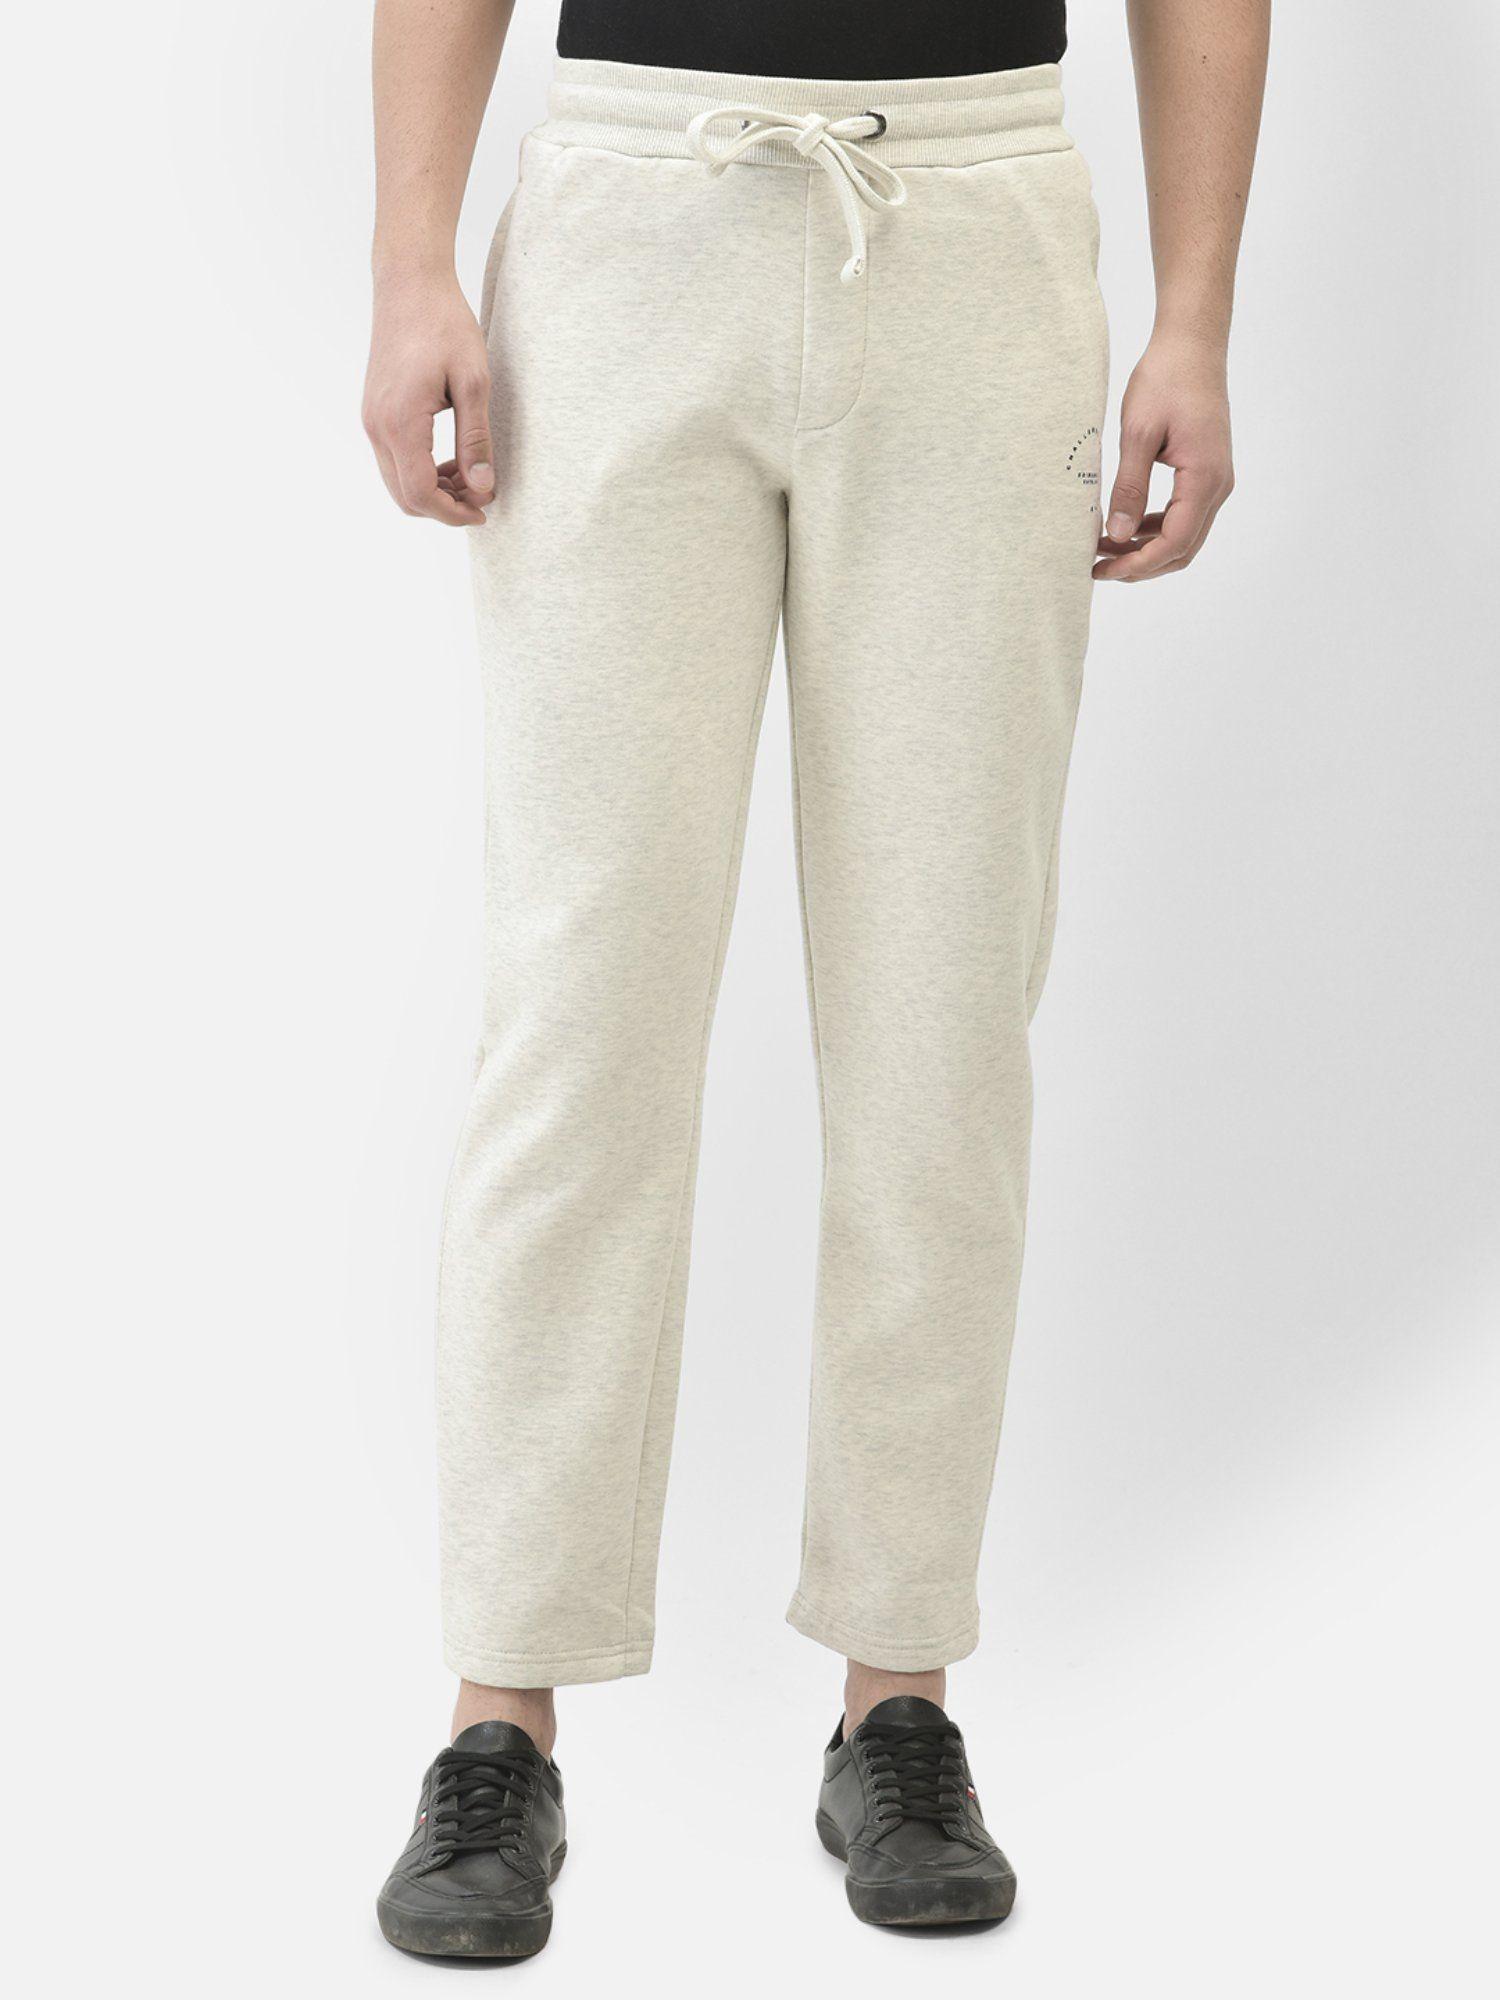 mens-off-white-track-pants